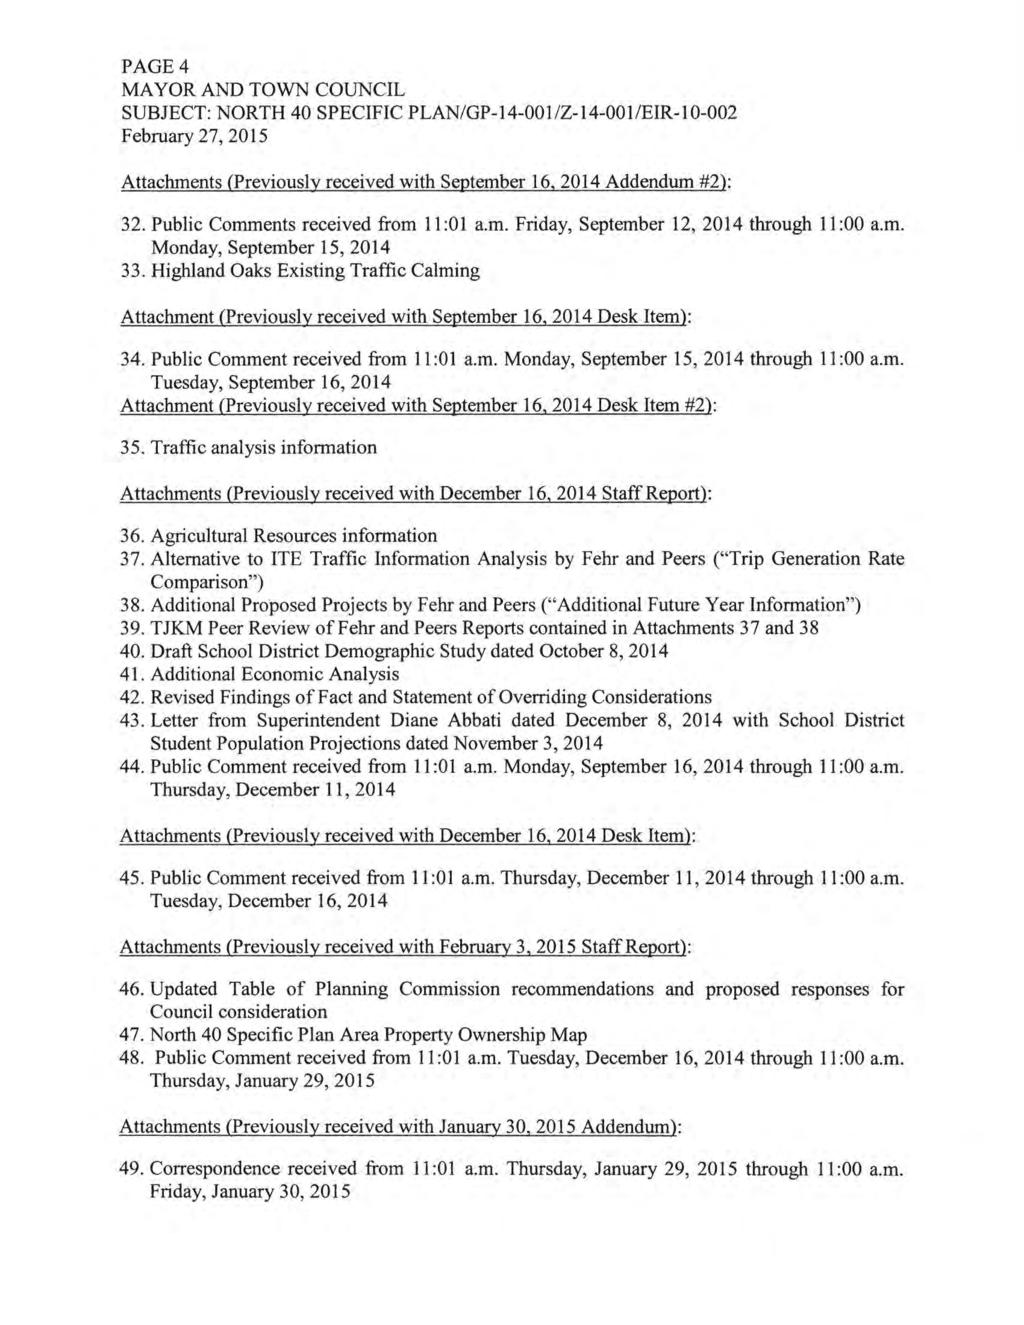 PAGE 4 MAYOR AND TOWN COUNCIL SUBJECT: NORTH 40 SPECIFIC PLAN /GP -14-001/ Z -14-001 /EIR -10-002 February 27, 2015 Attachments ( Previously received with September 16, 2014 Addendum # 2): 32.